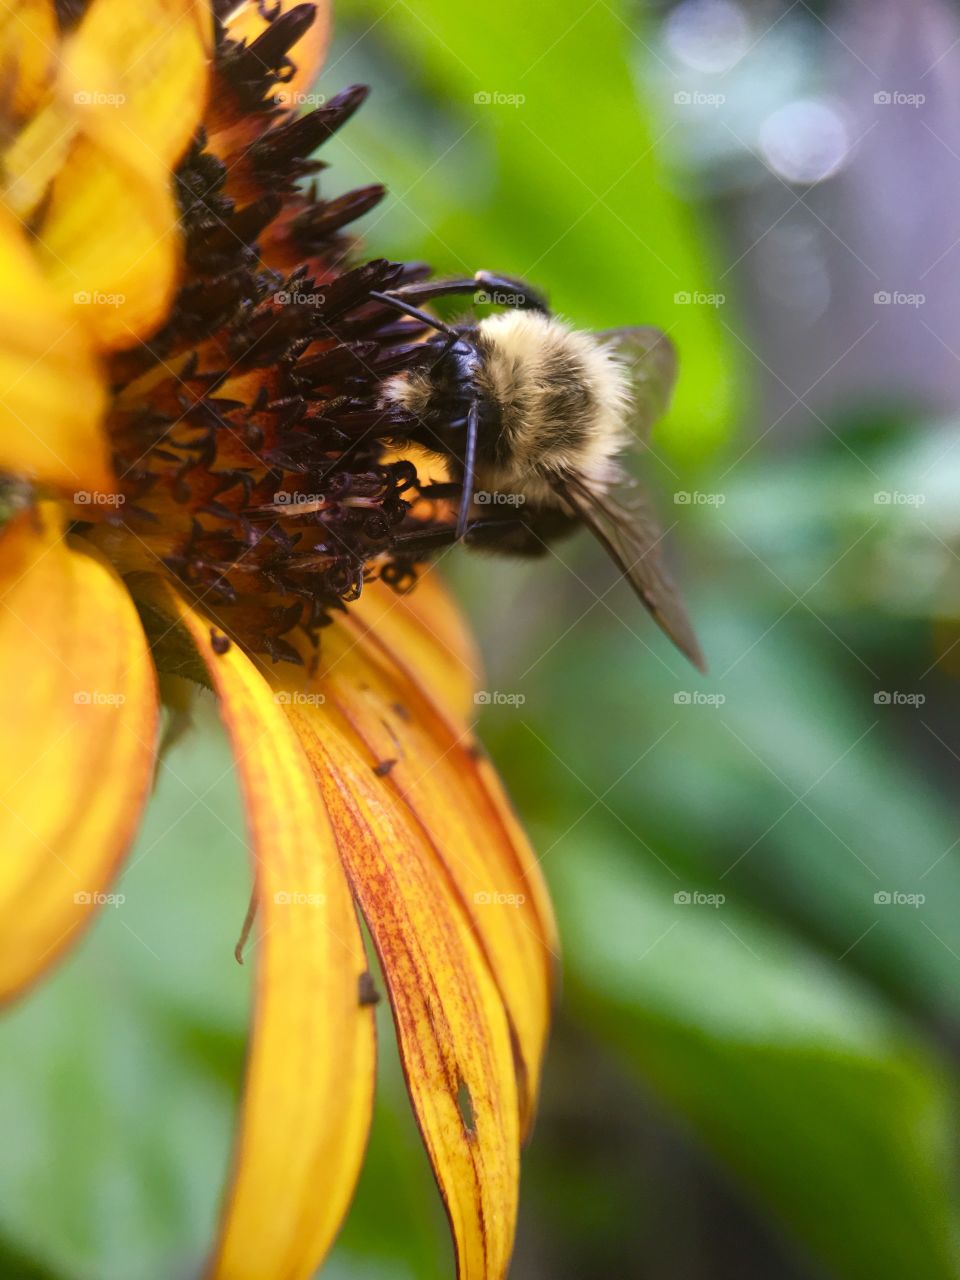 Extreme close up of a bee on flower